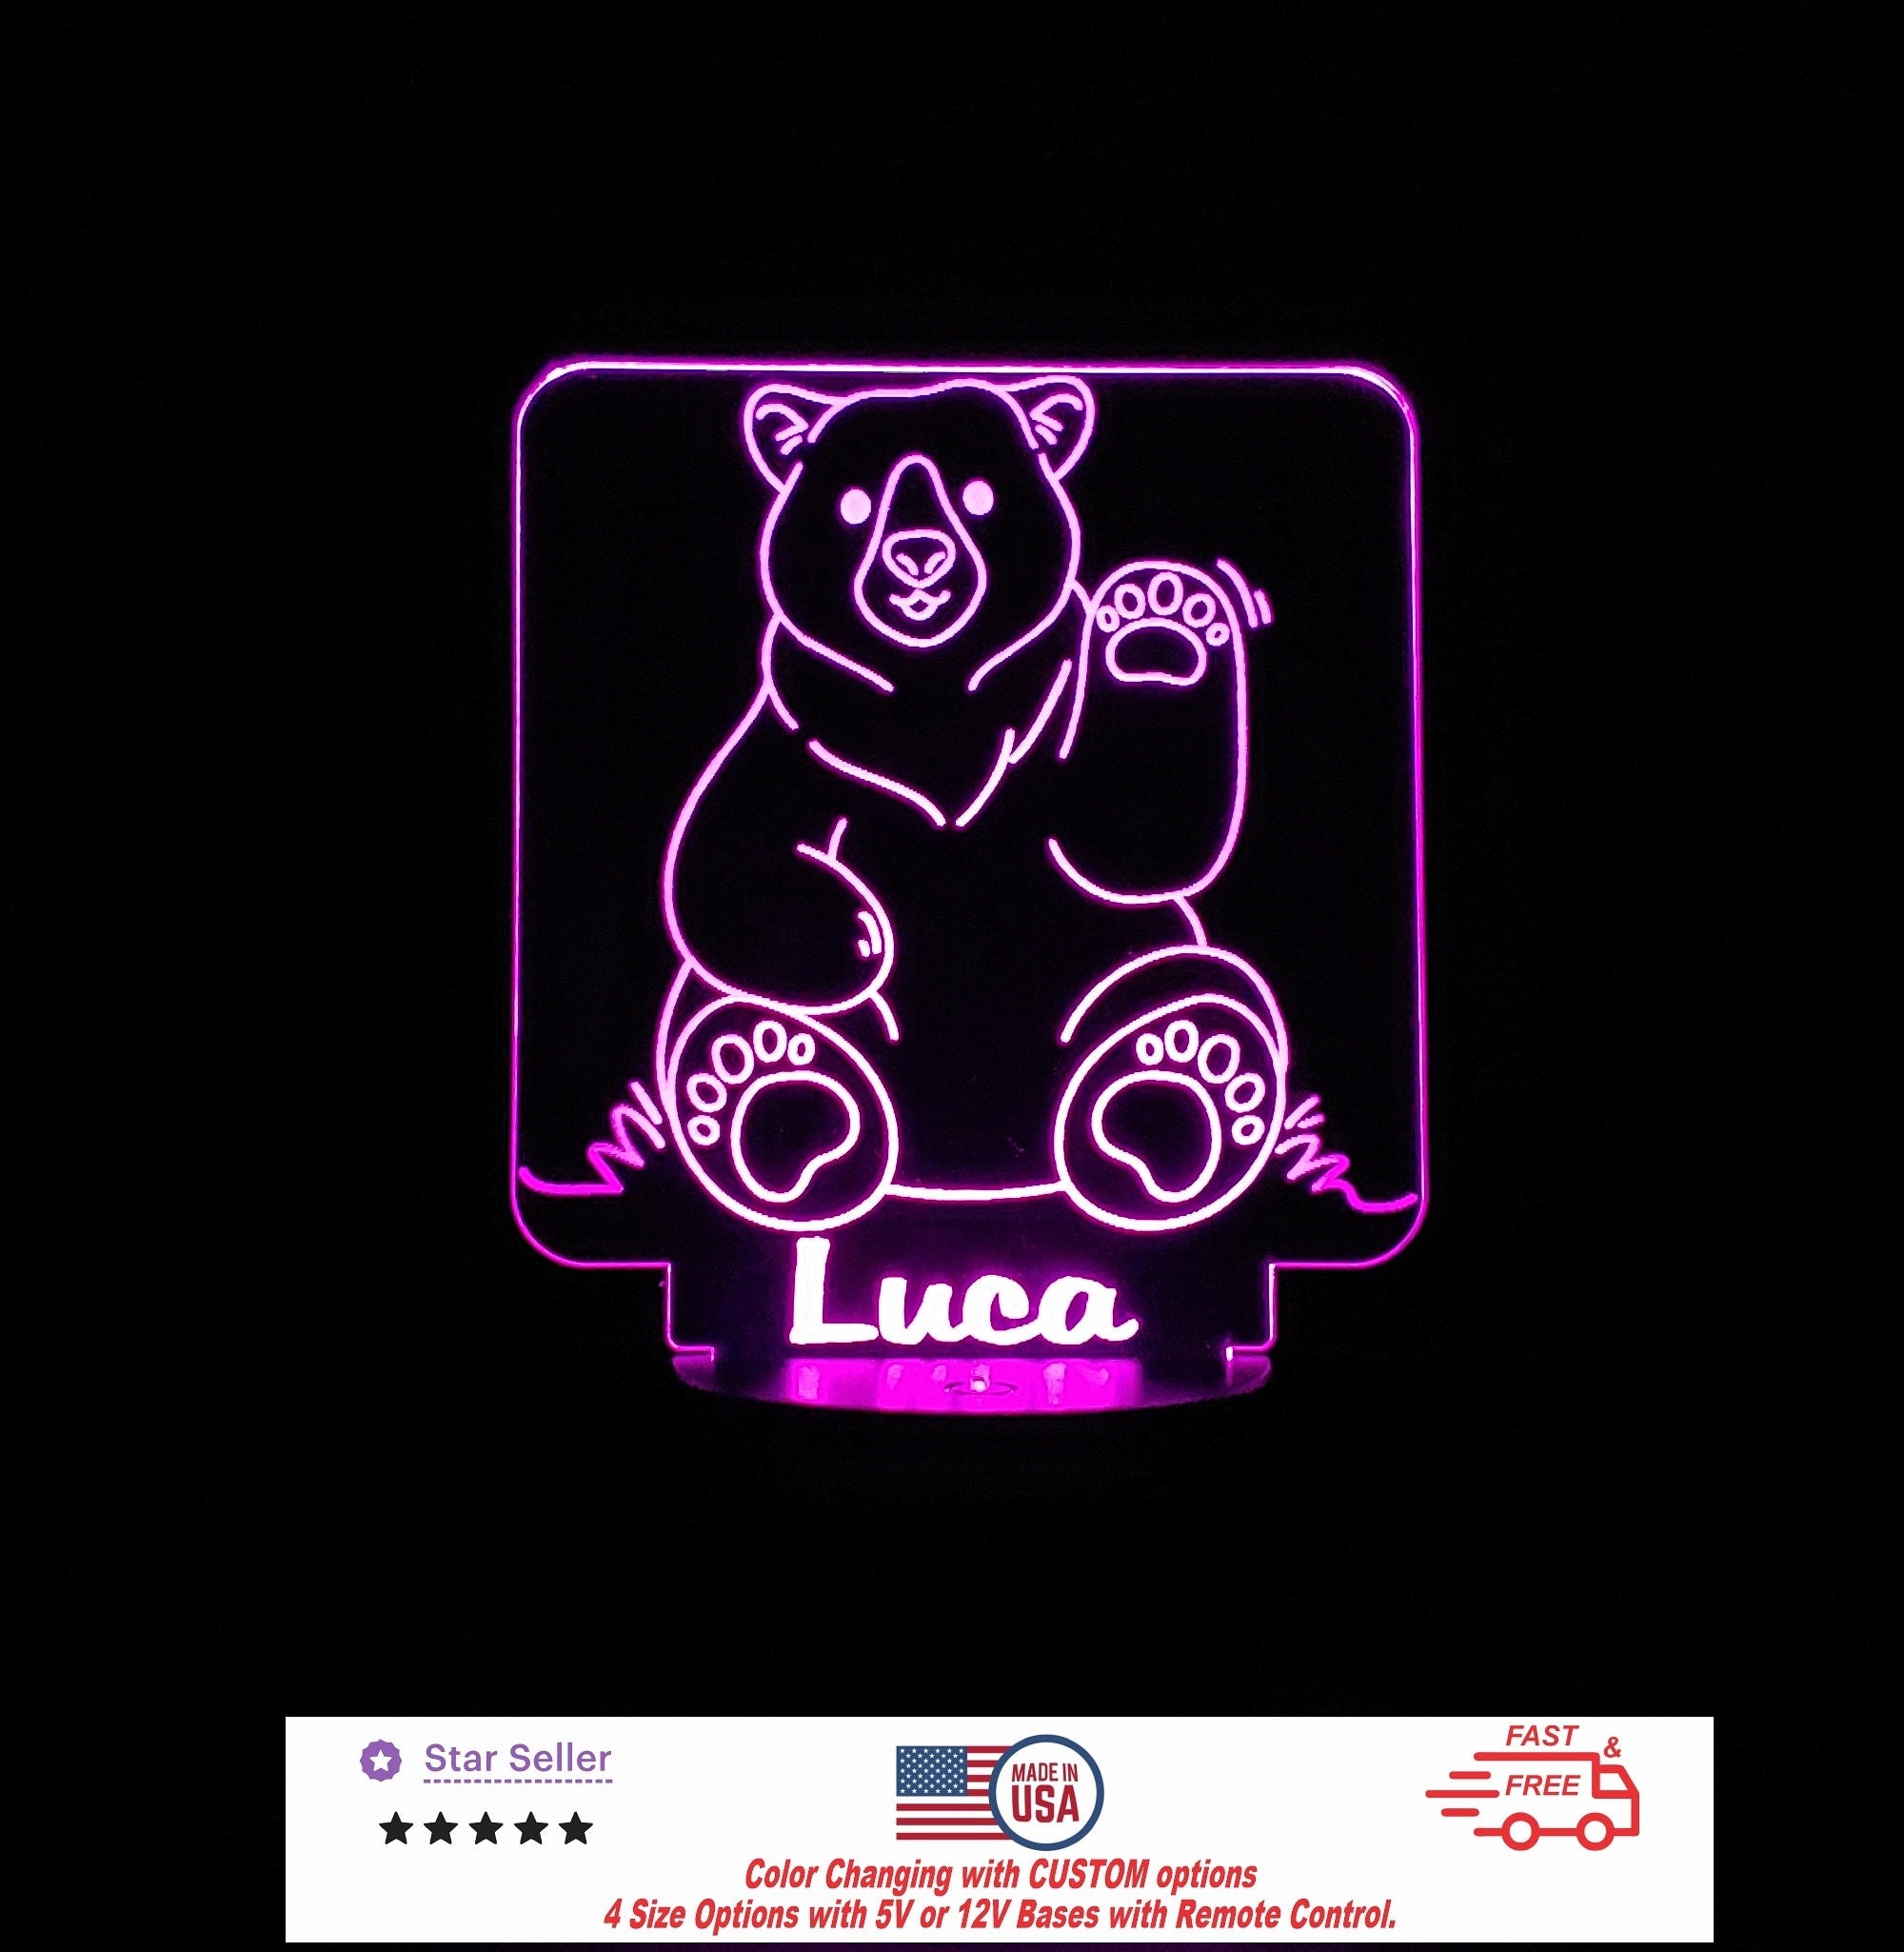 Custom Bear Personalized LED Night Light - Neon sign, Room Decor, Party Enhancer, Nursery, Kids' Room, Free Shipping Made in USA